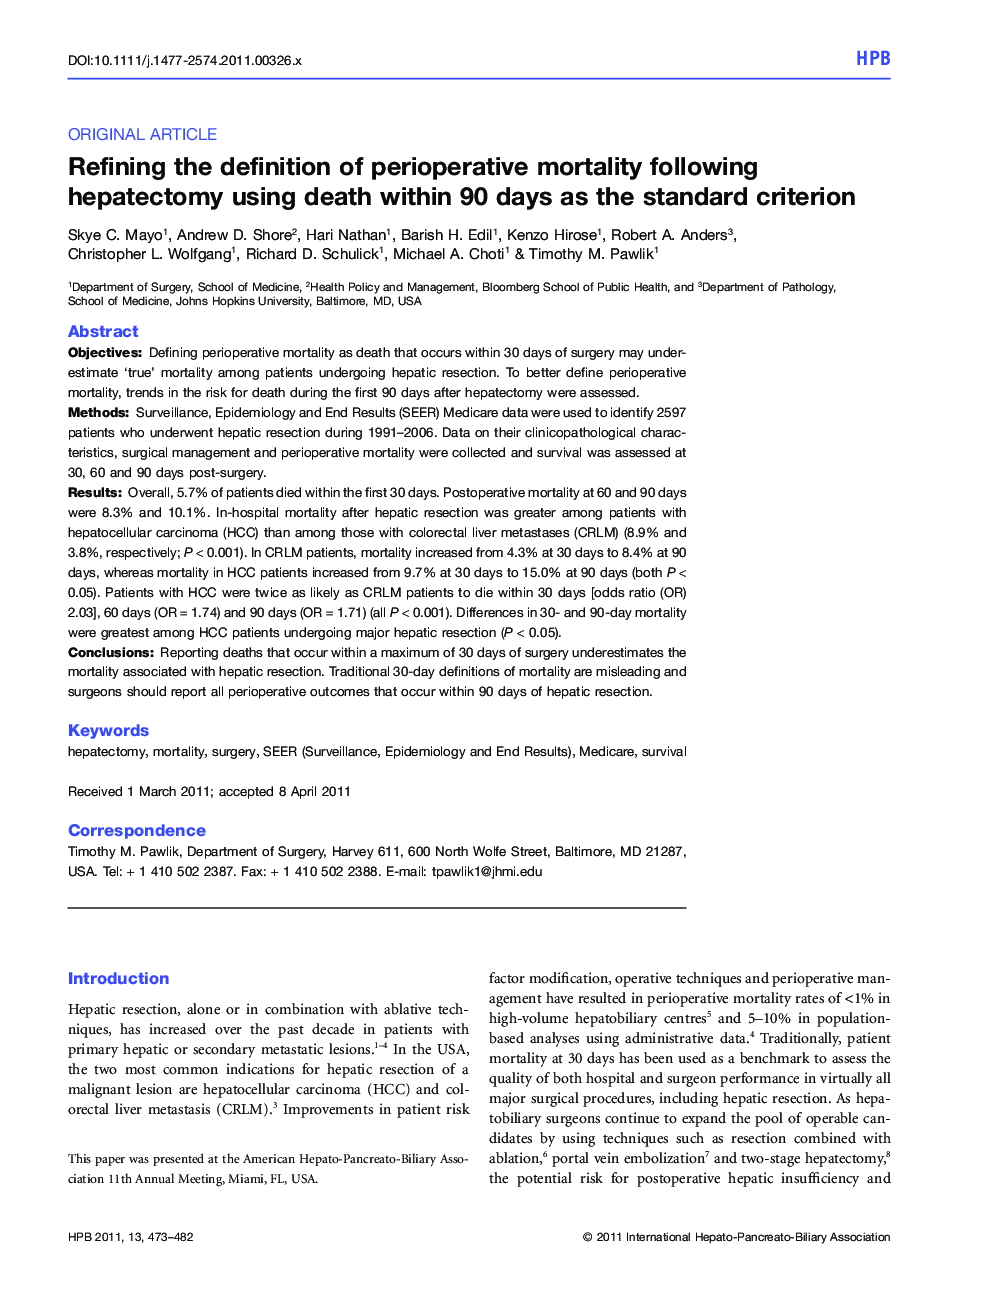 Refining the definition of perioperative mortality following hepatectomy using death within 90 days as the standard criterion